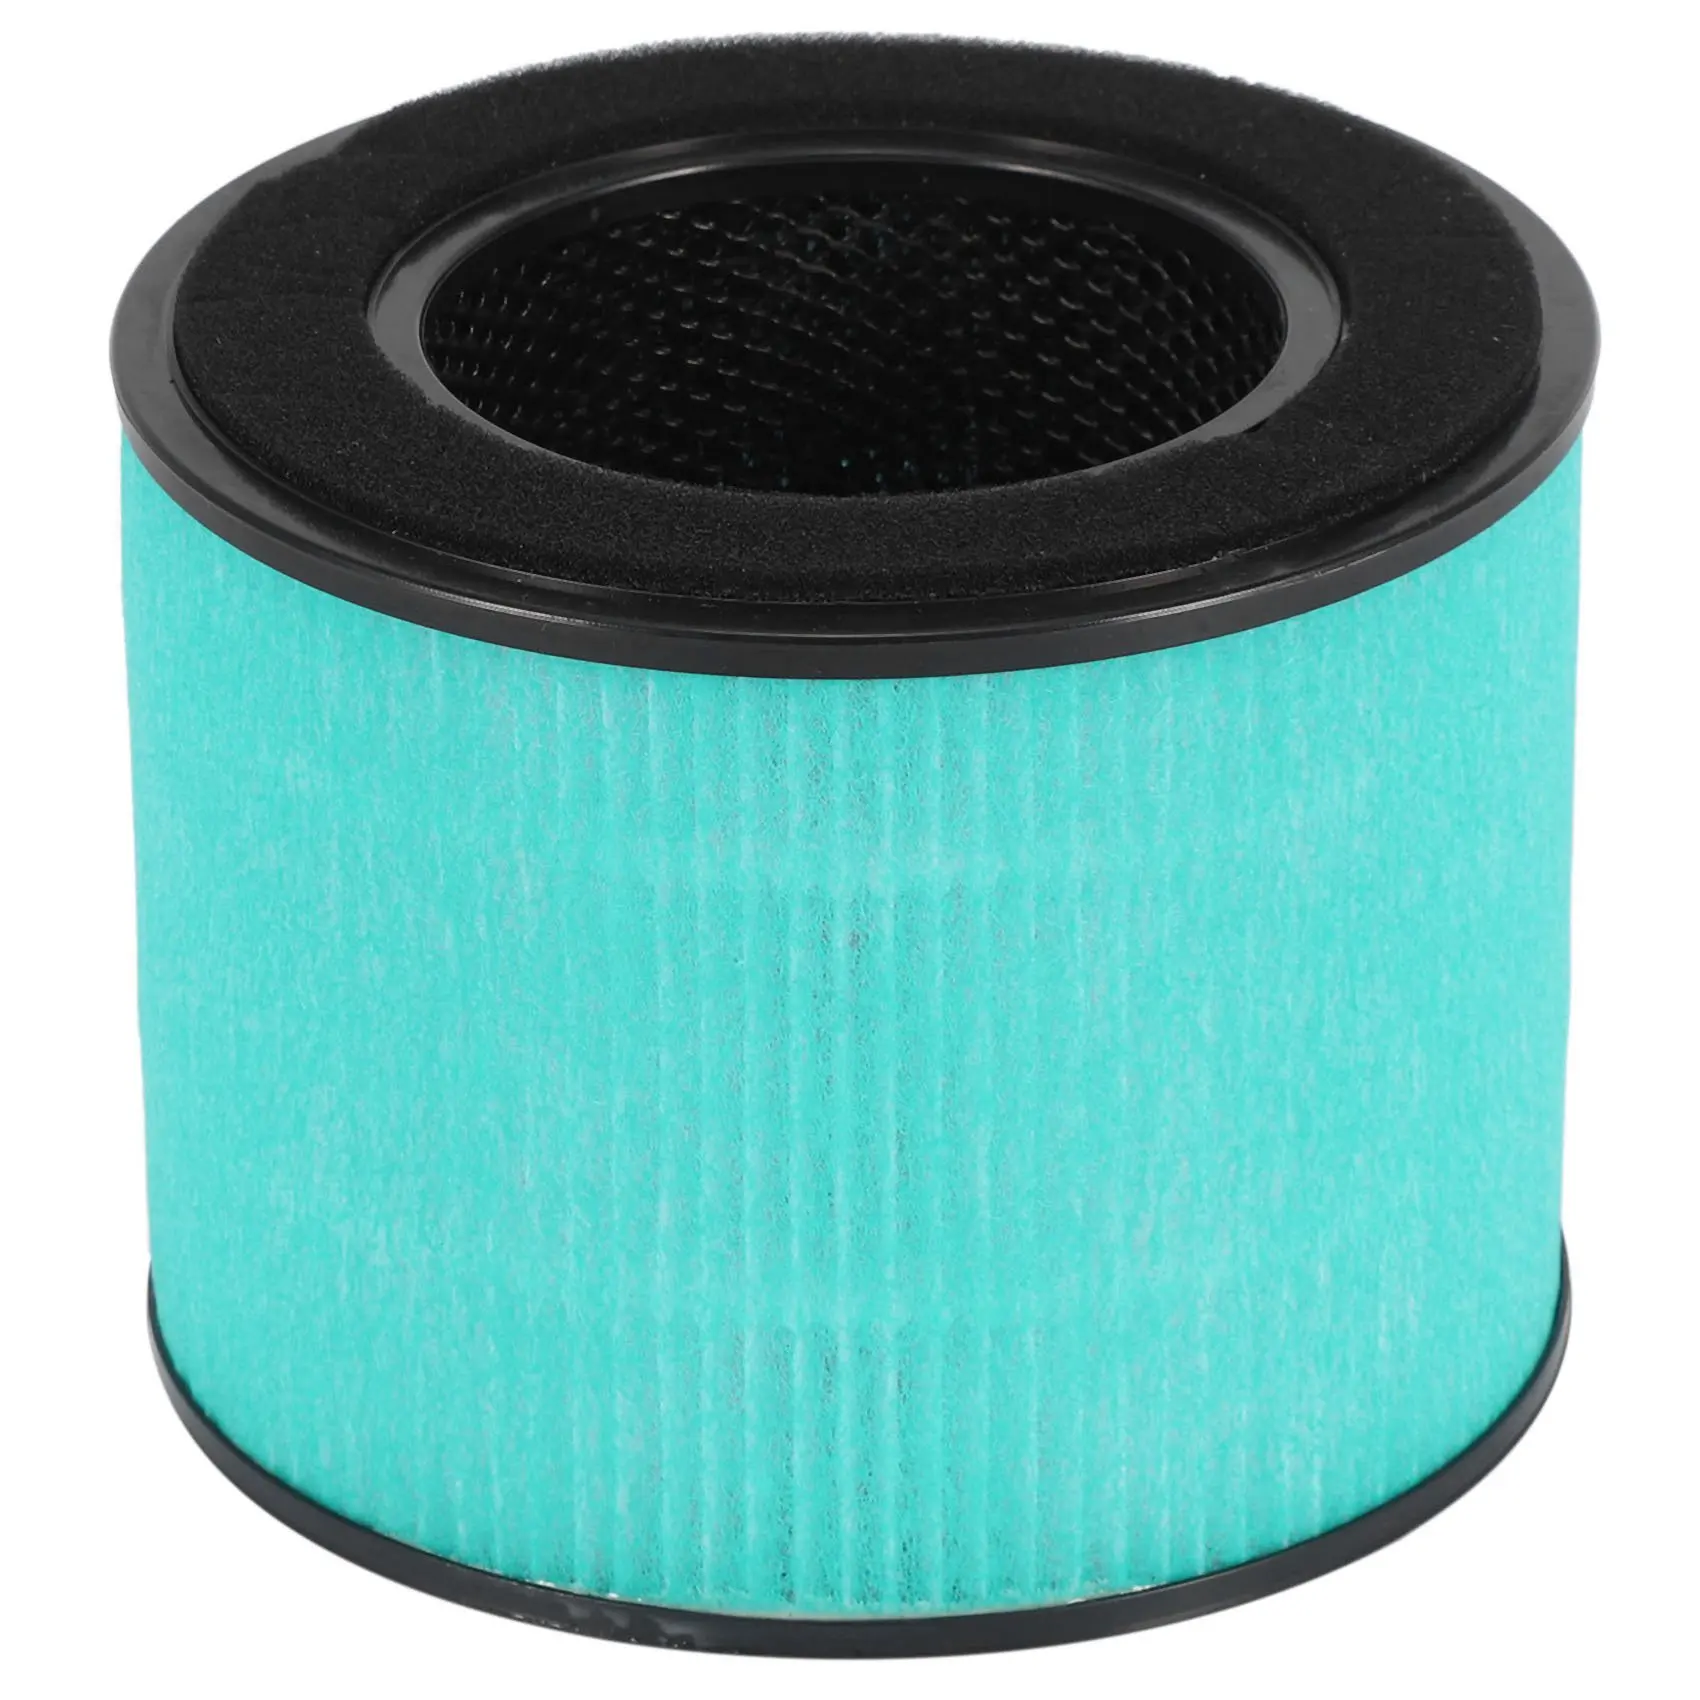 

Replacement HEPA Filter for PARTU BS-08,3-In-1 Filter System Include -Filter,Real HEPA Filter,Activated Carbon Filter